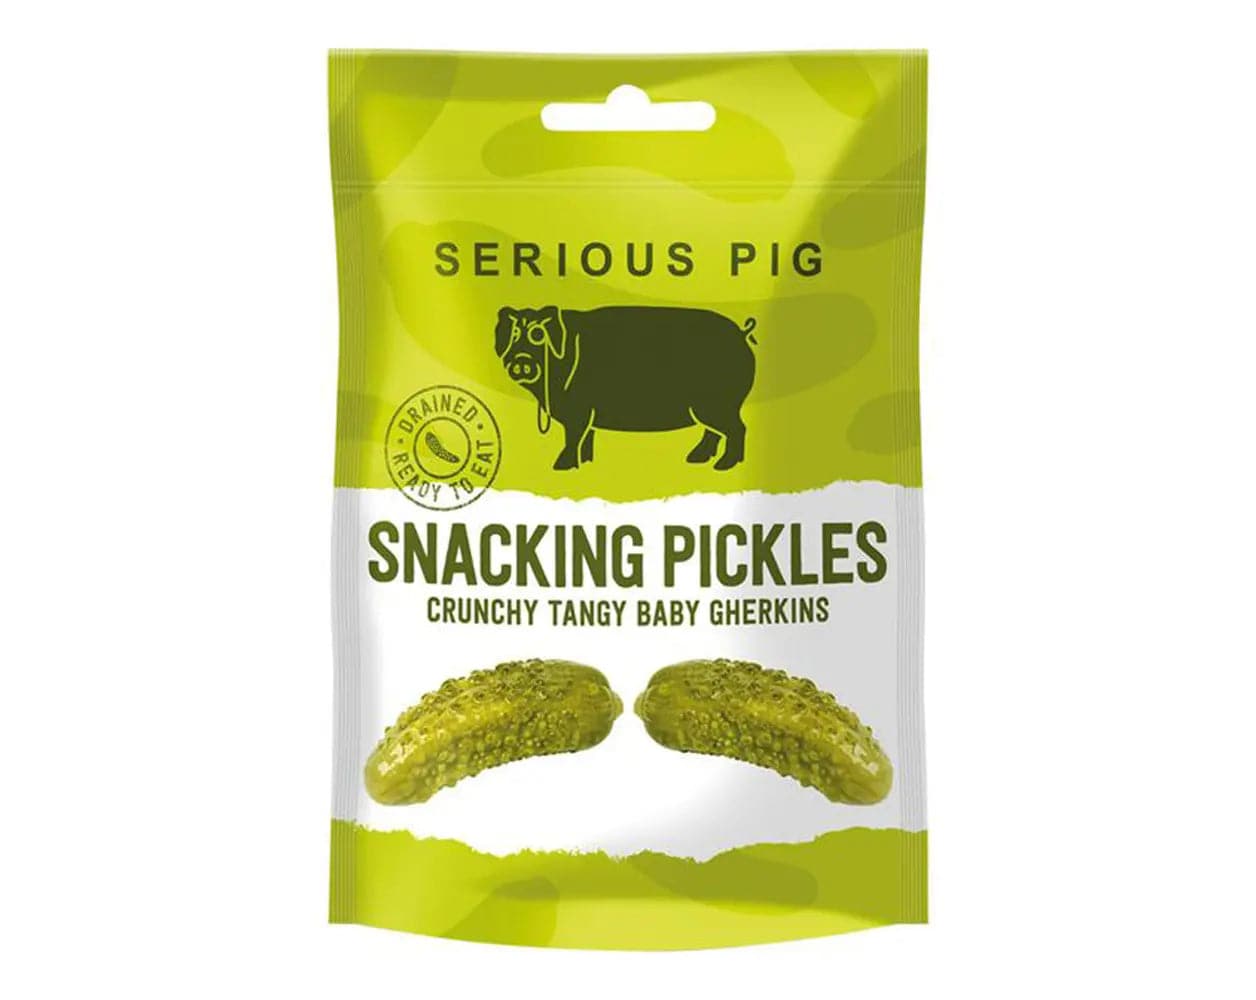 Serious Pig Snacking Pickles - IMP & MAKER